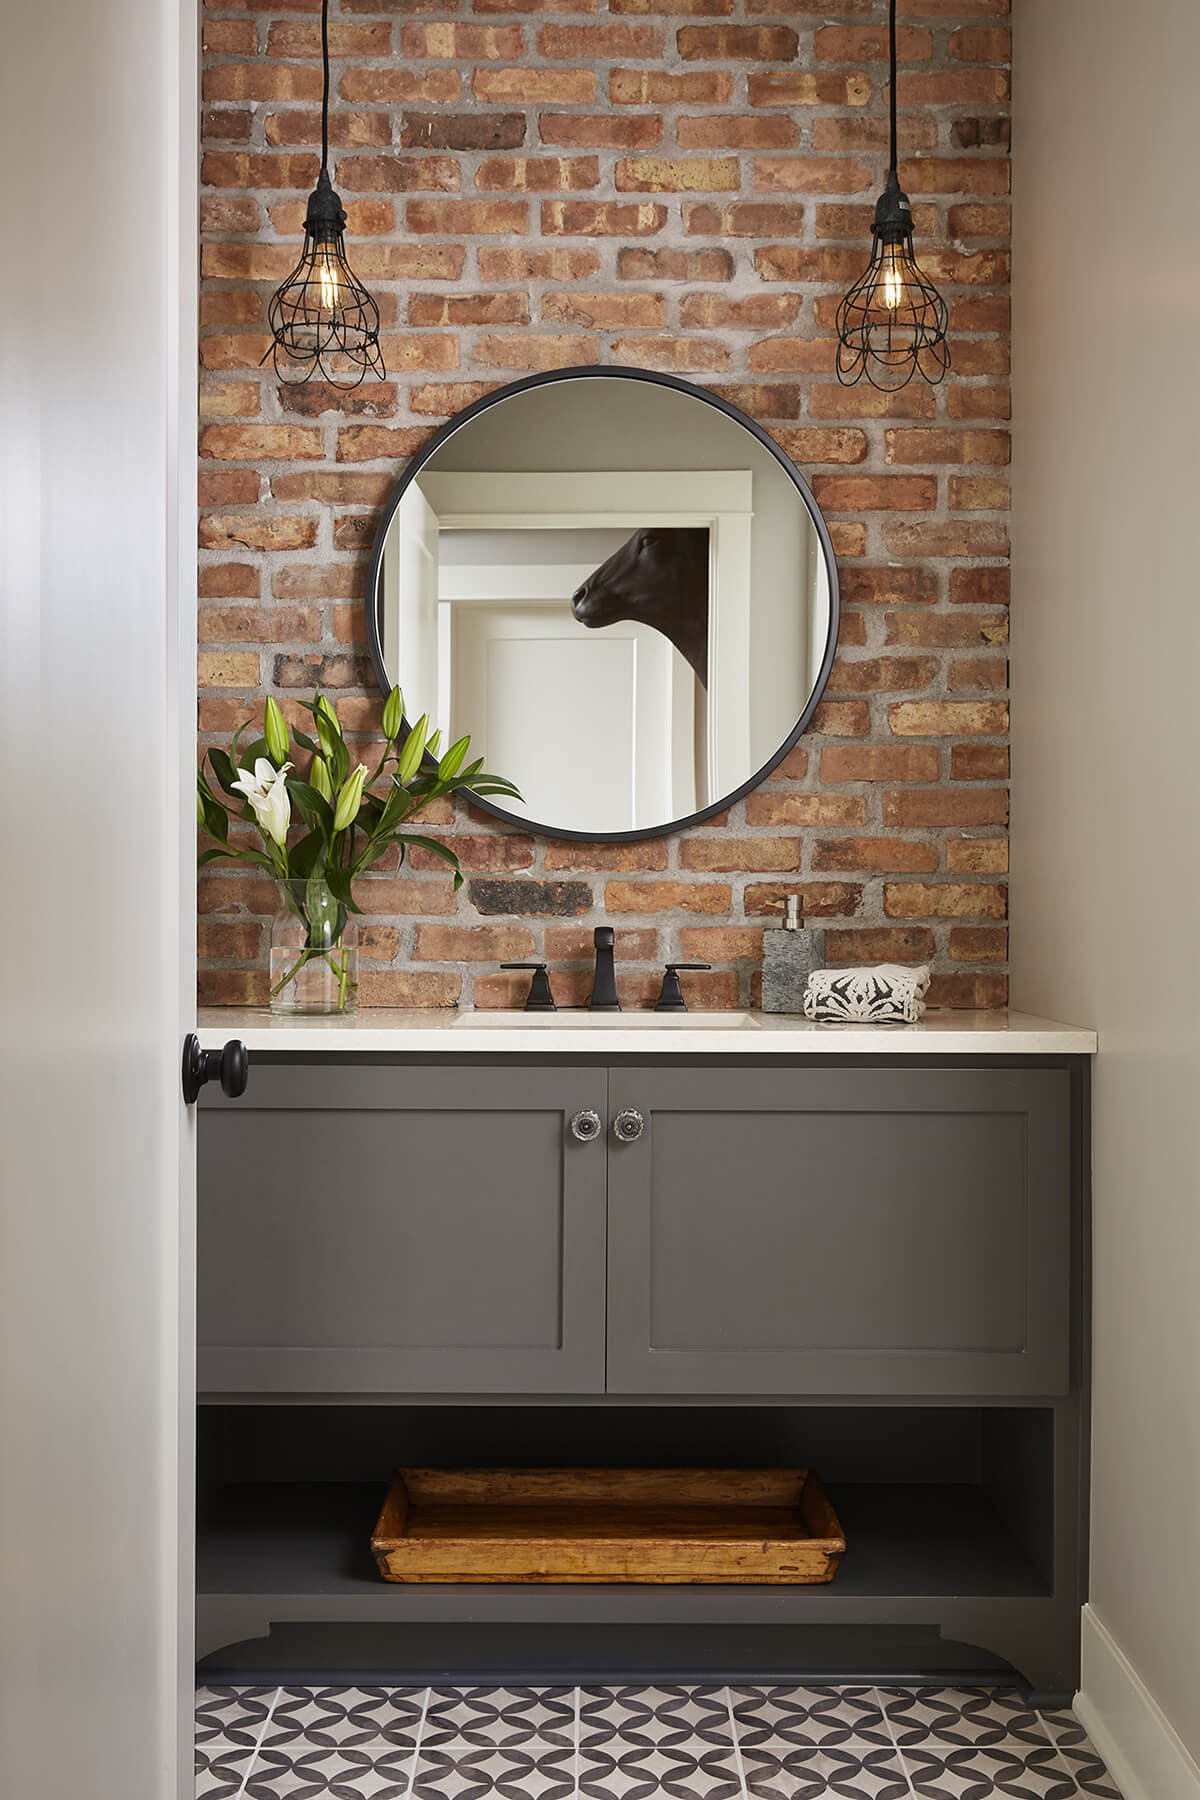 Exposed Brick for a Statement Piece in the Bathroom